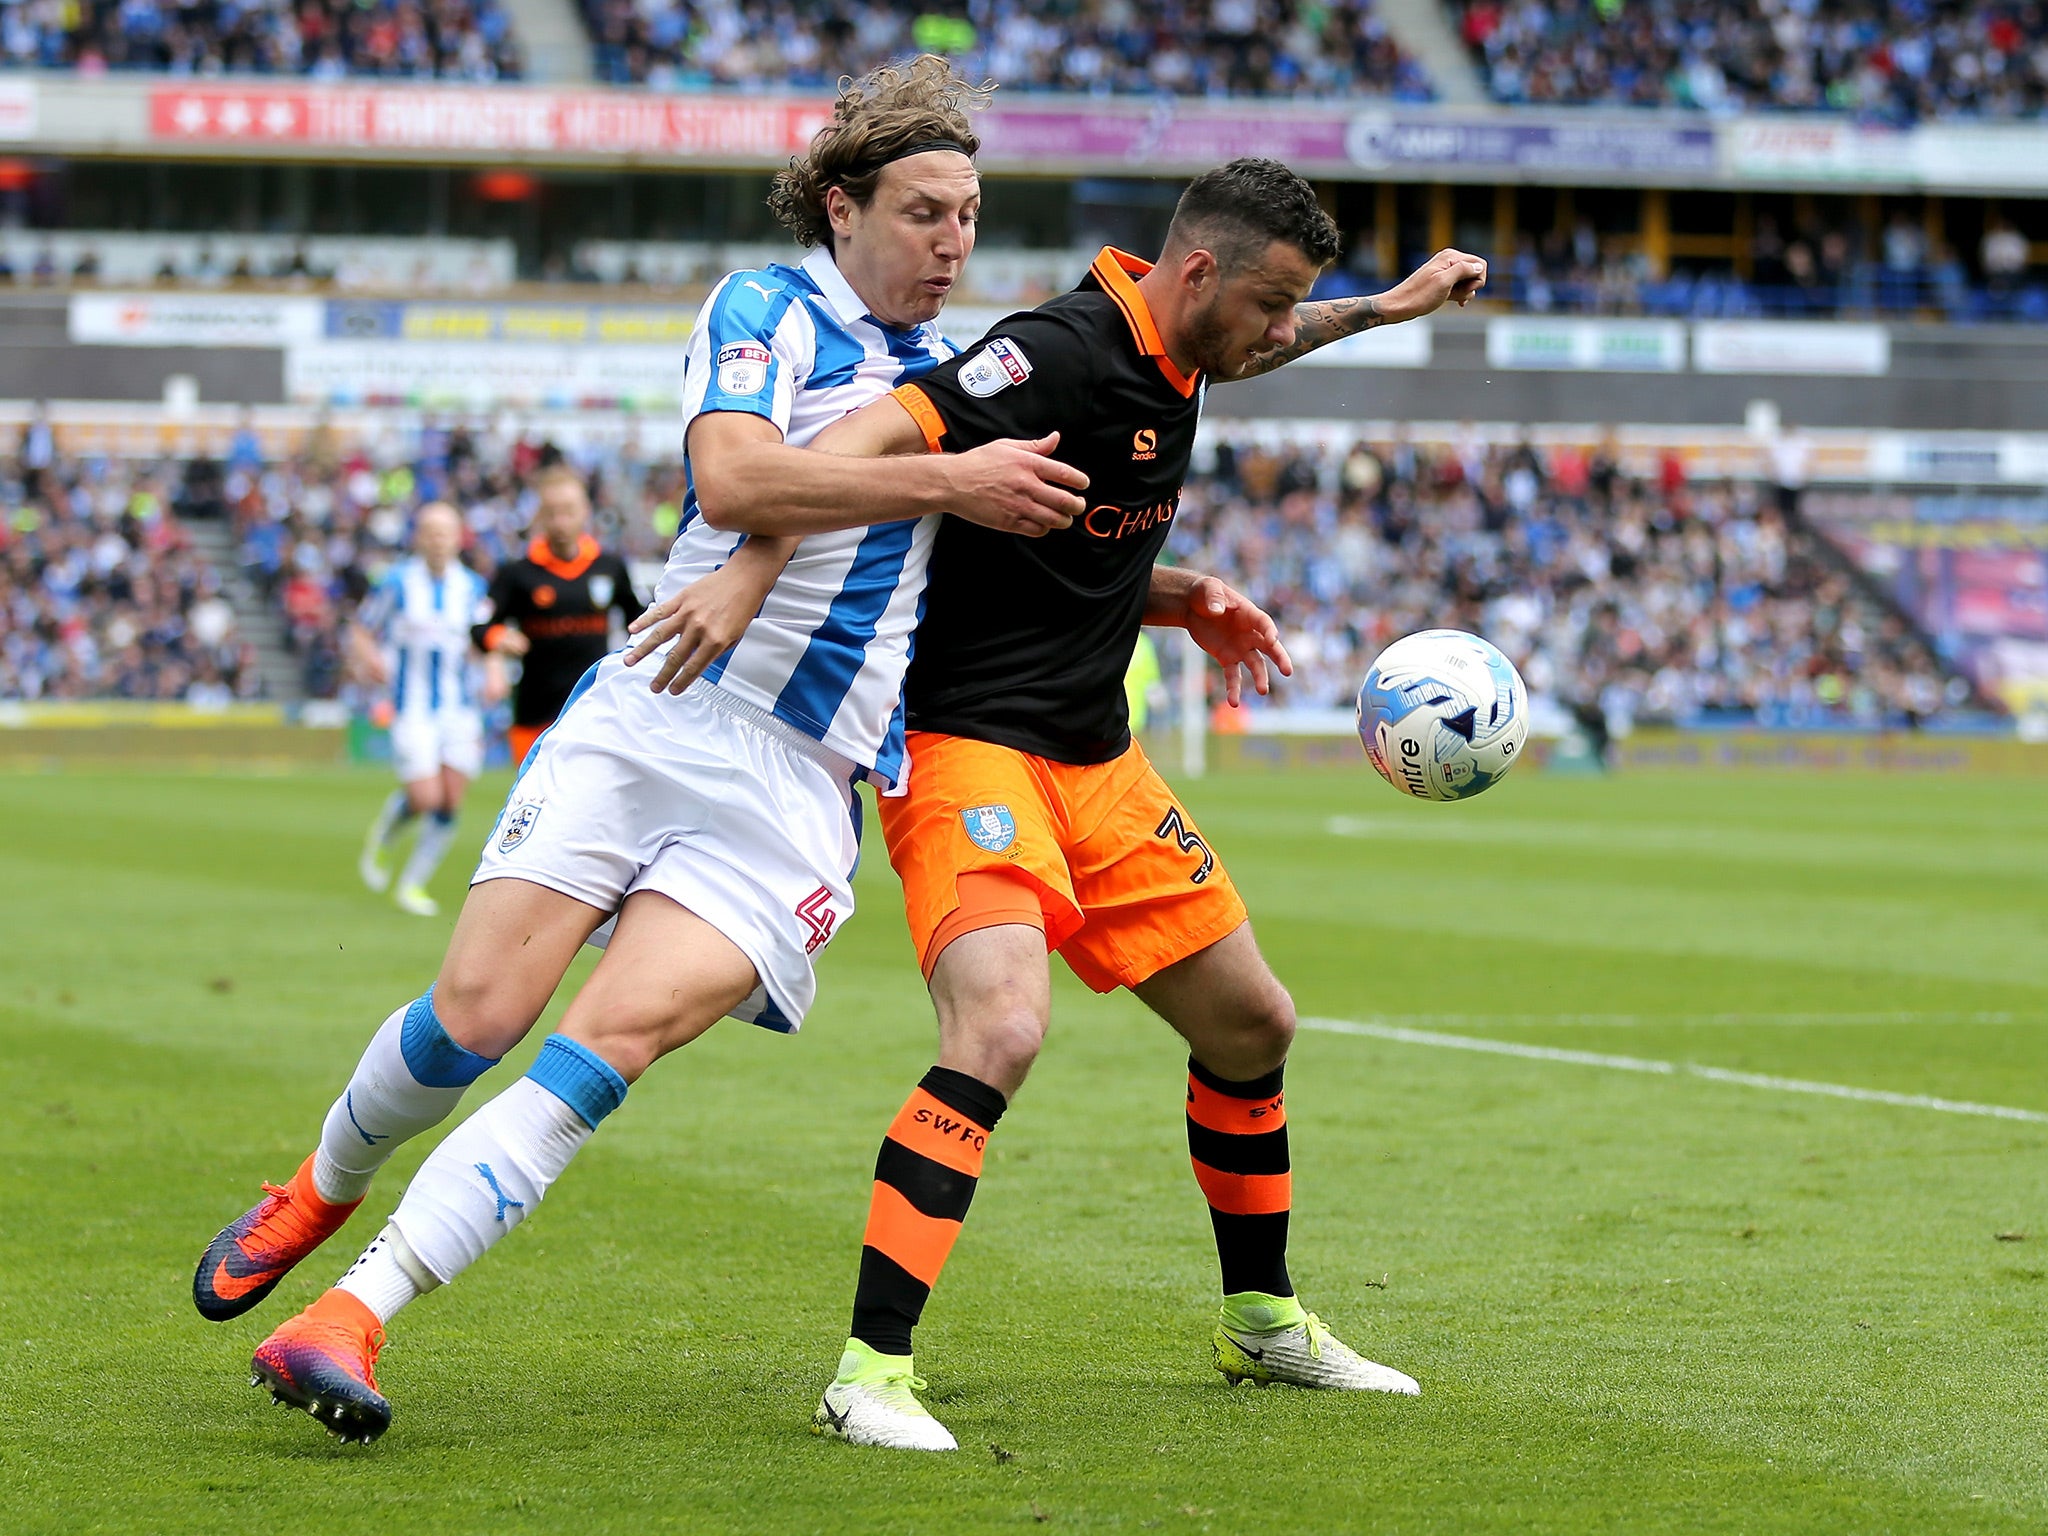 Huddersfield were held to a 0-0 draw by Sheffield Wednesday in the first leg